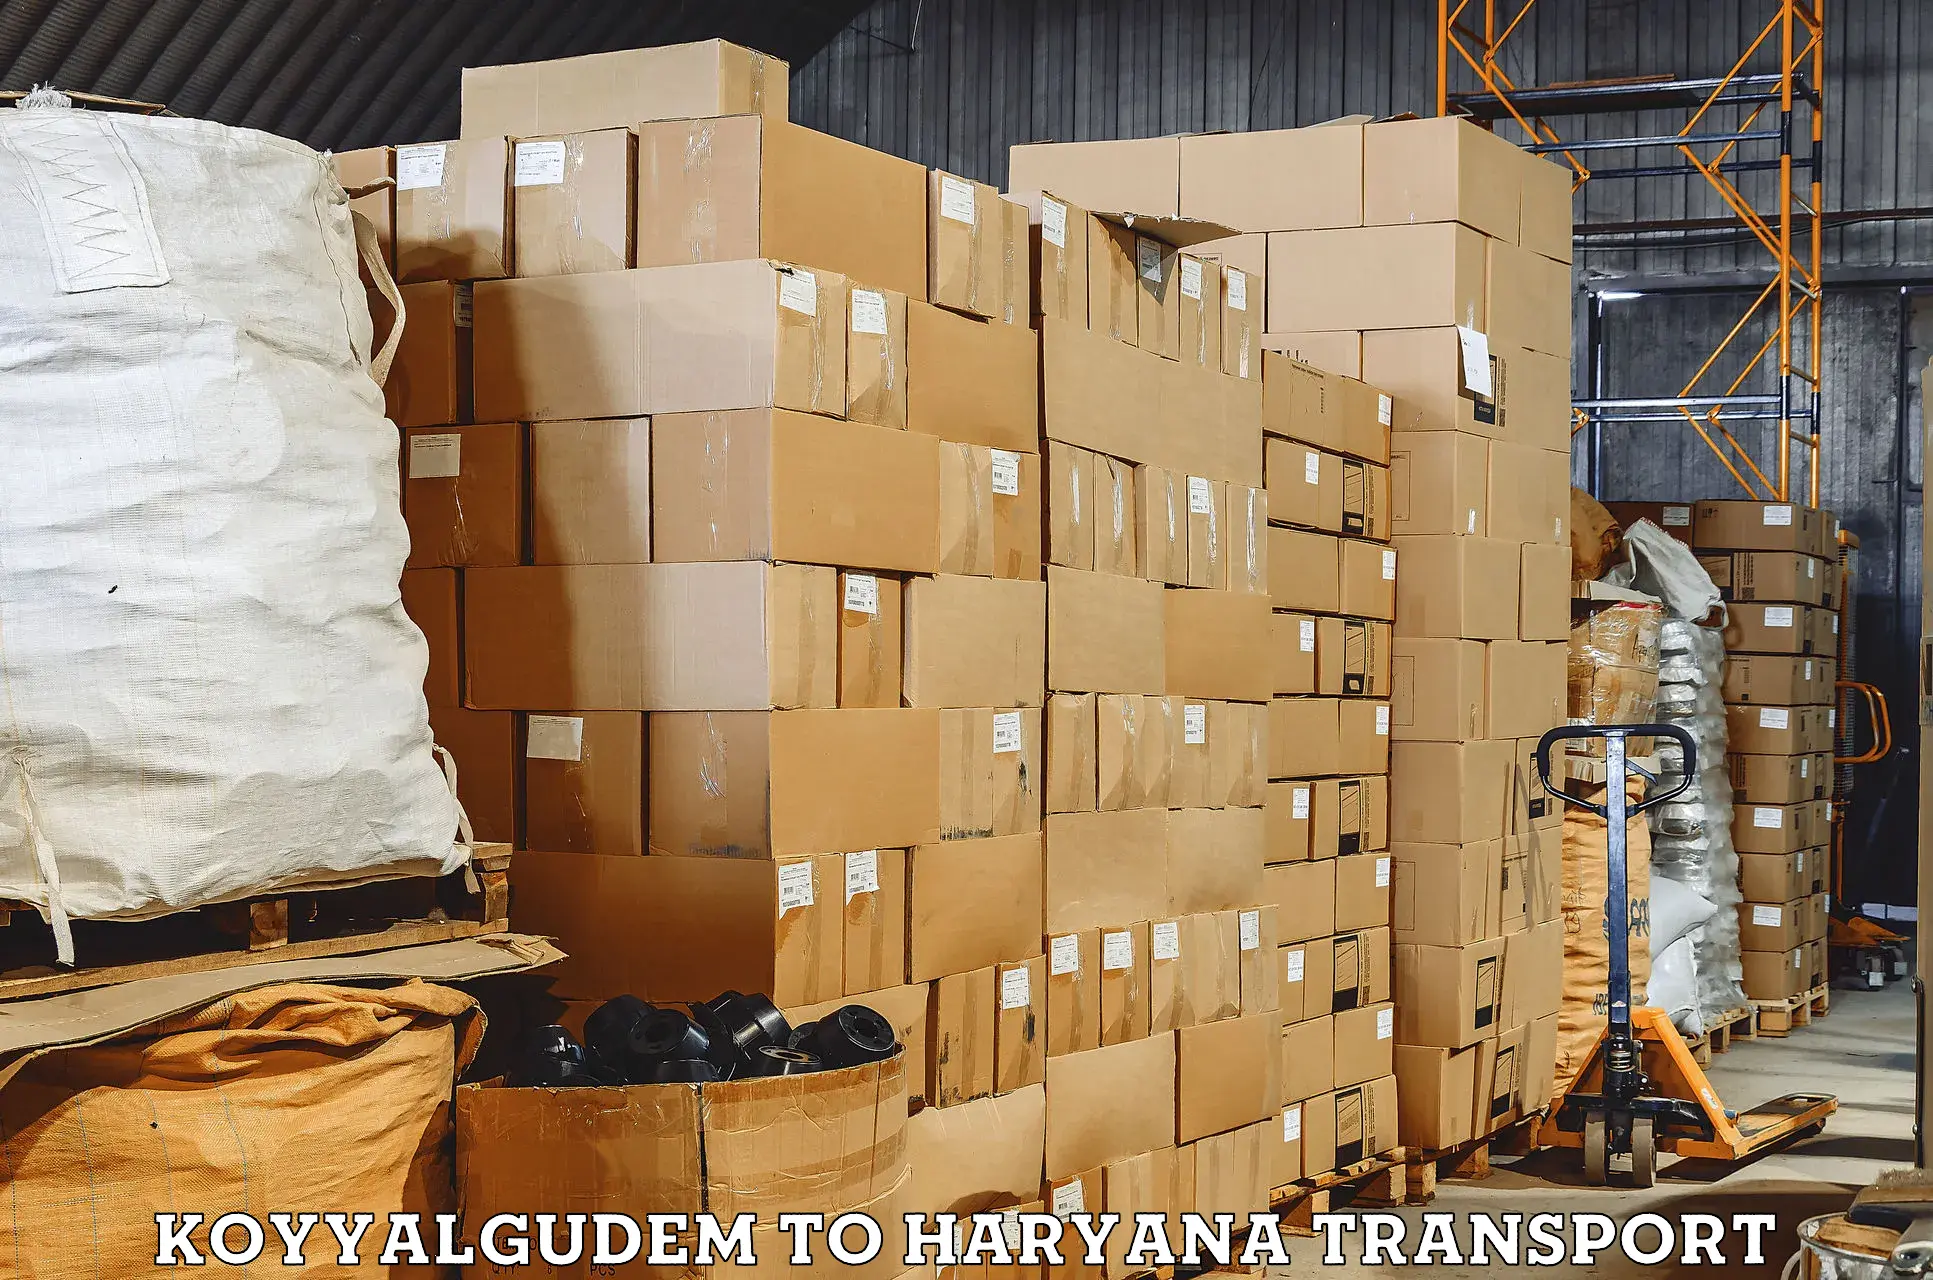 Transport bike from one state to another Koyyalgudem to Haryana